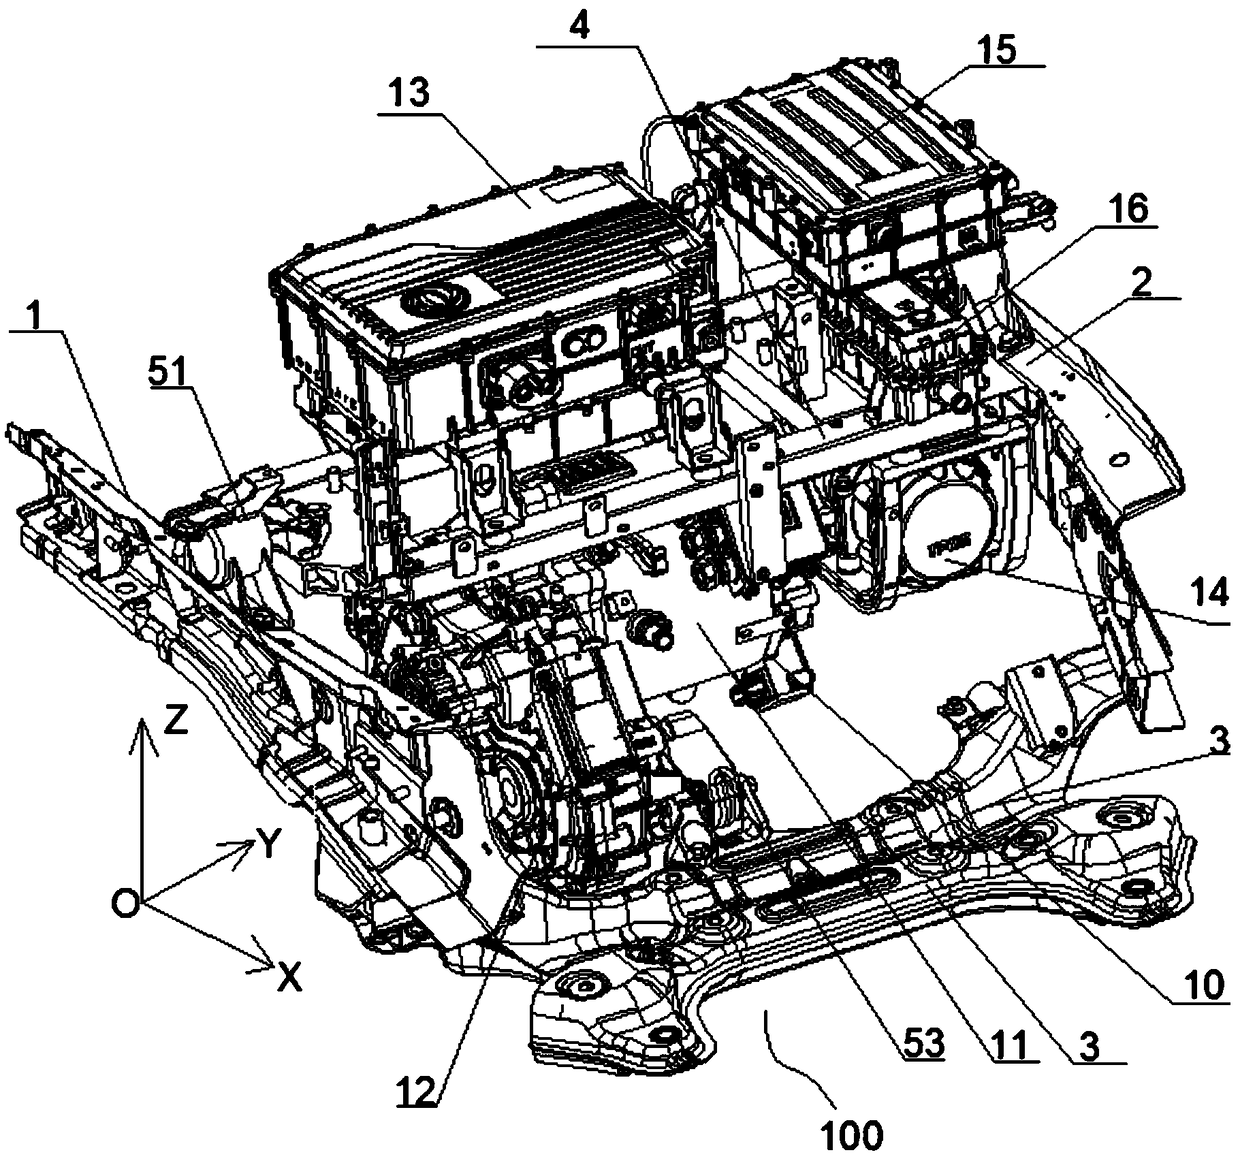 Installing system for electric vehicle power assemblies and electric vehicle